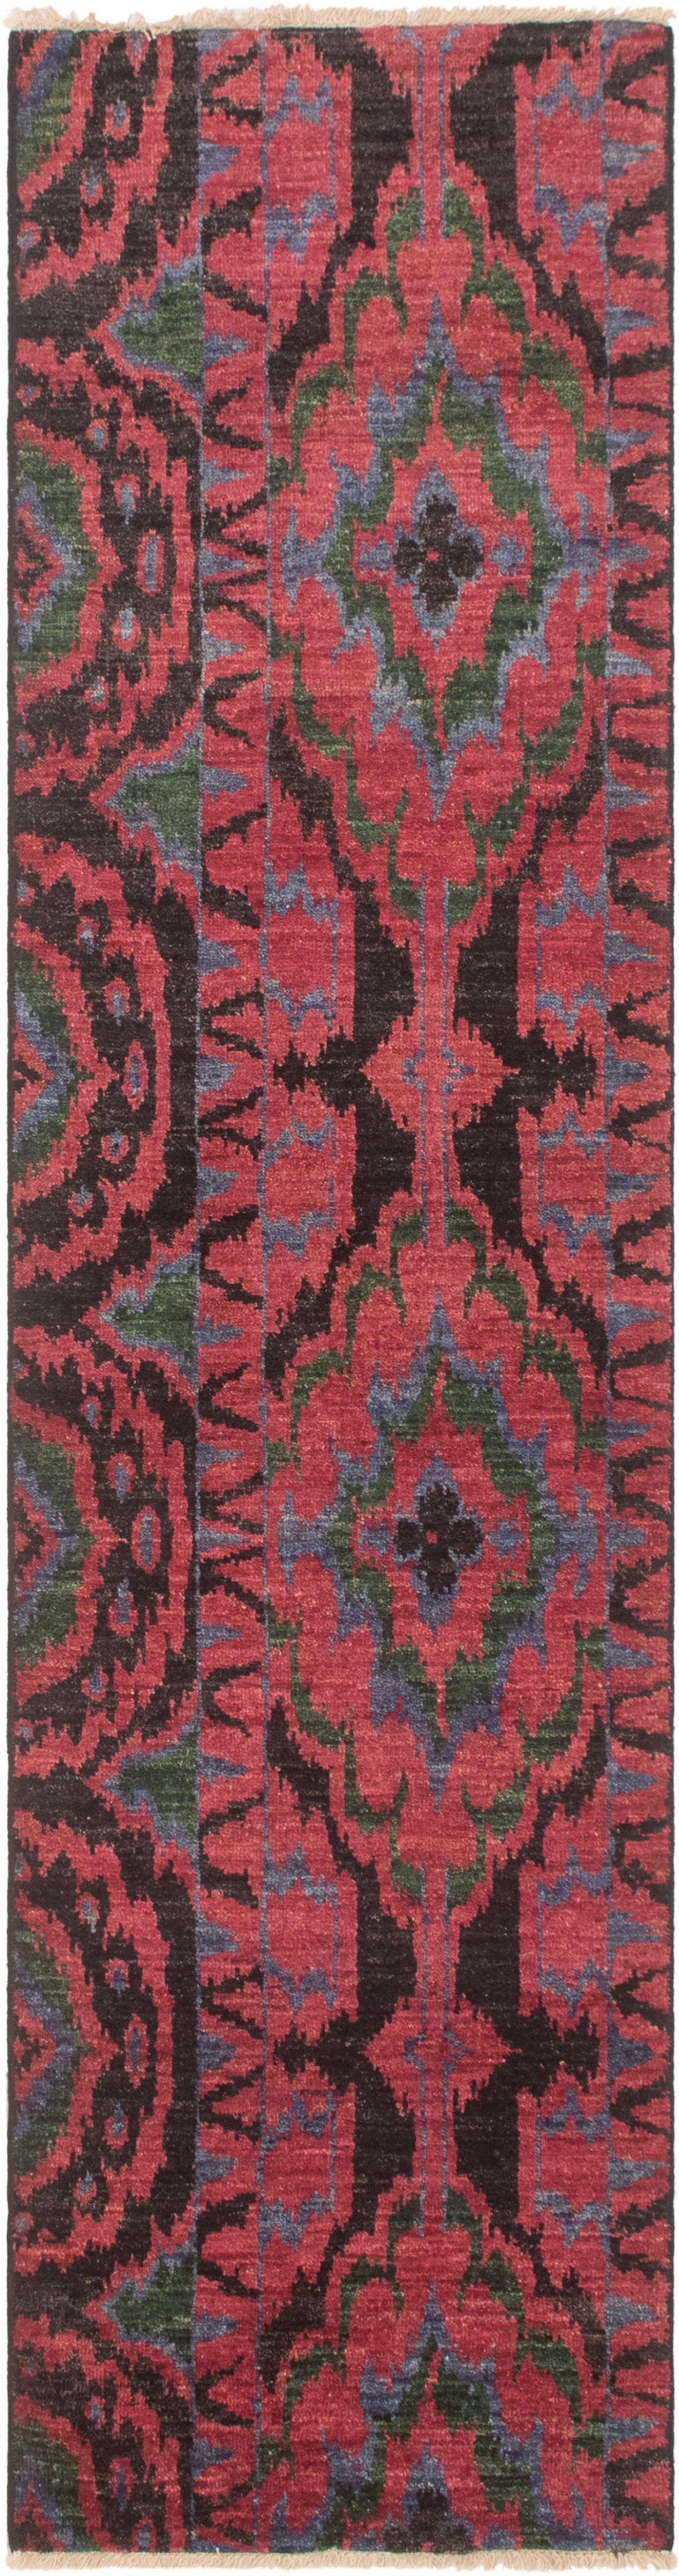 Hand-knotted Shalimar Dark Pink Wool Rug 2'8" x 10'4" Size: 2'8" x 10'4"  